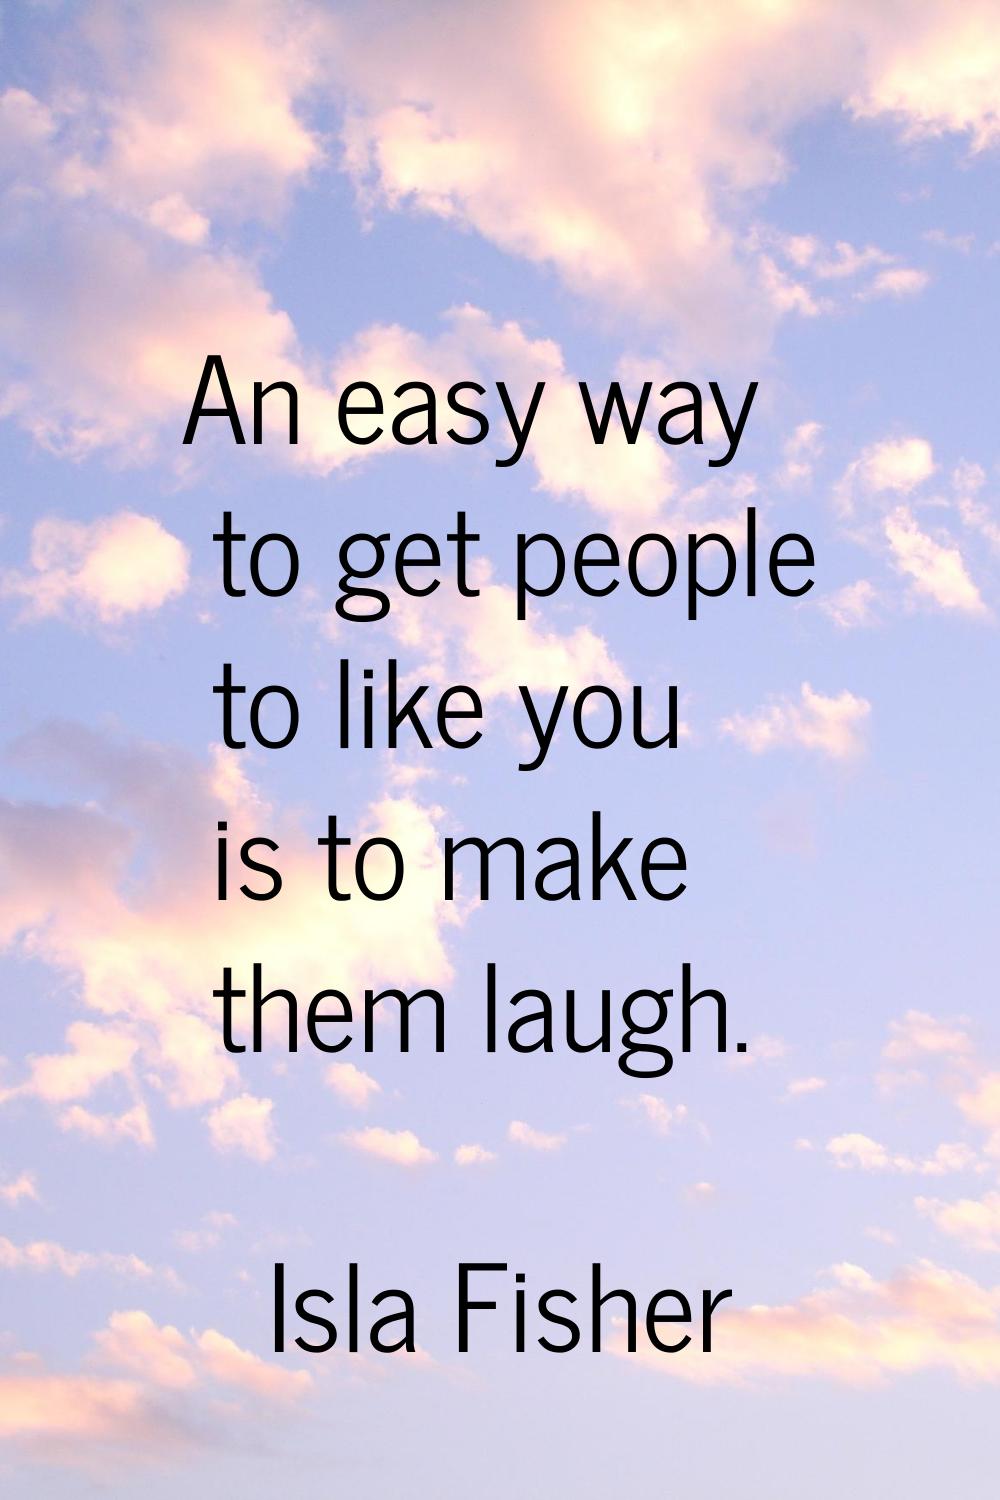 An easy way to get people to like you is to make them laugh.